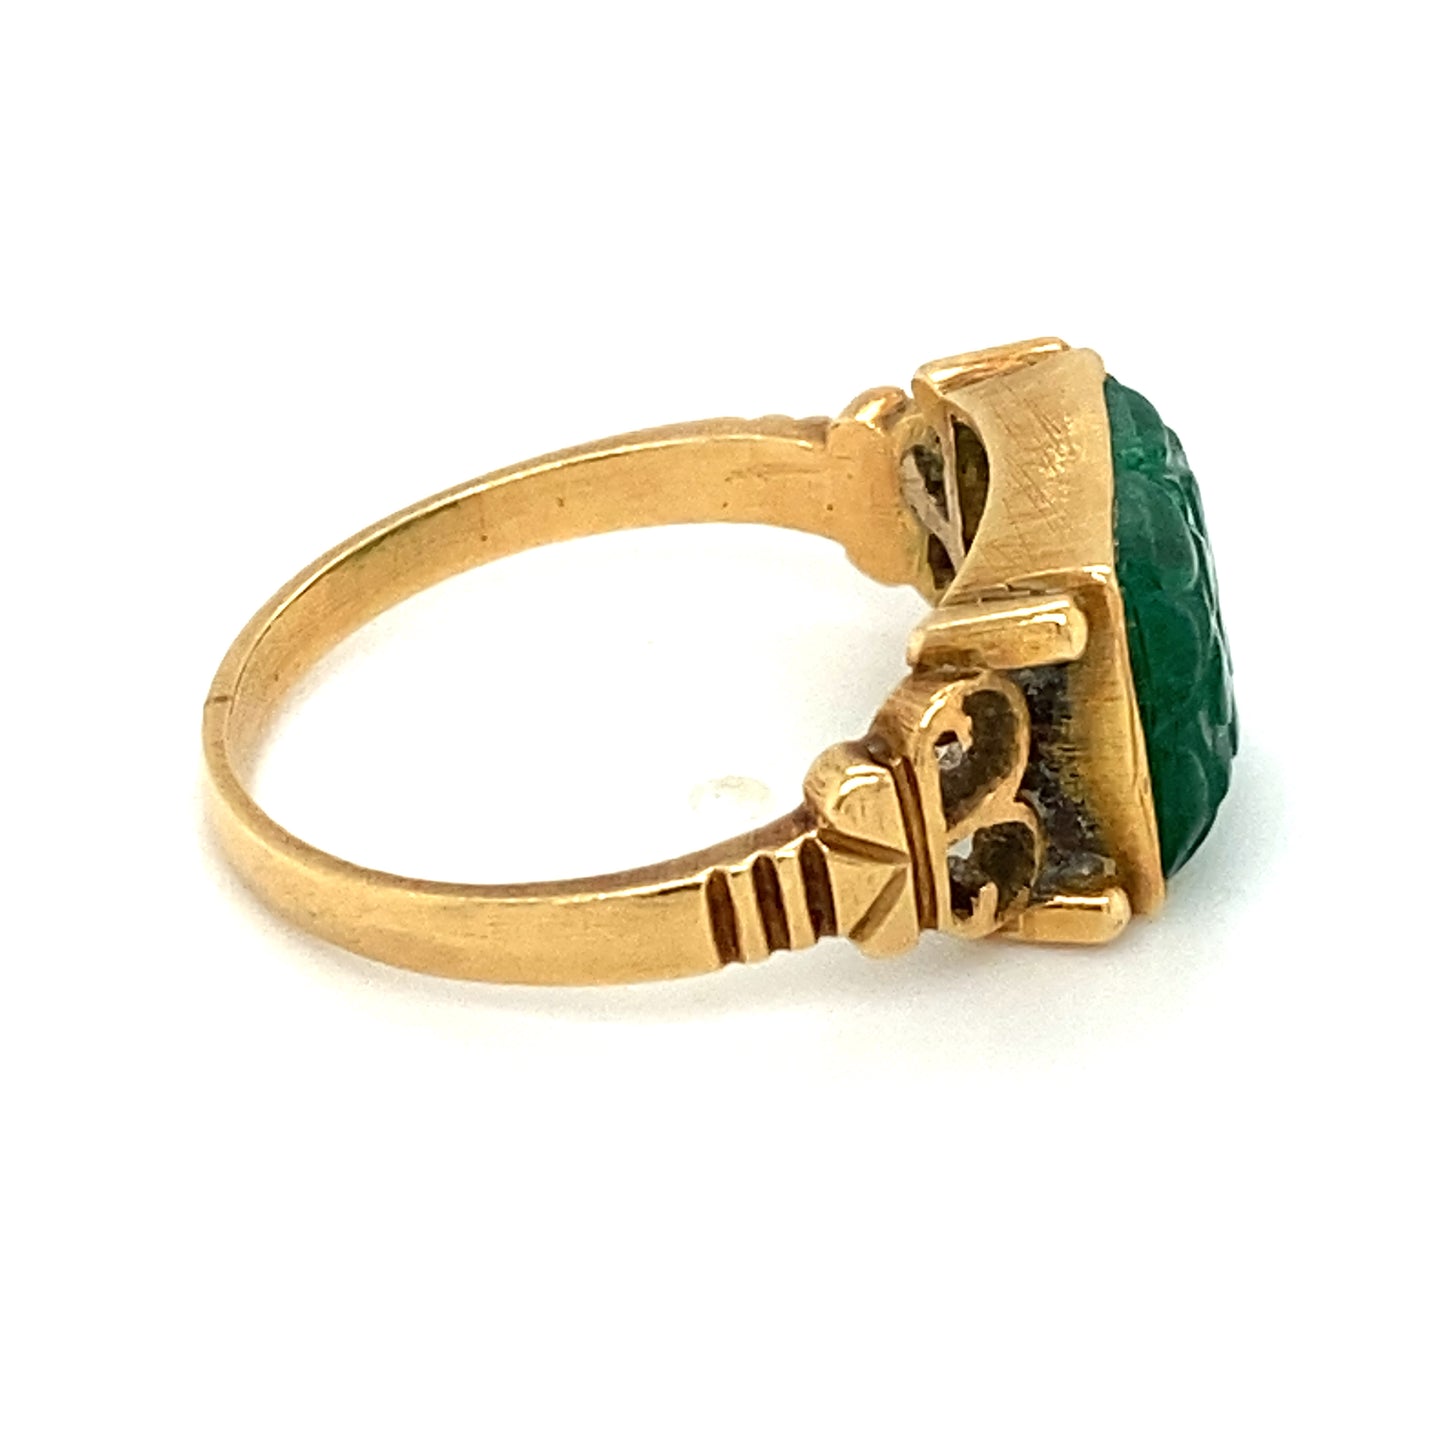 Circa 1920s Carved Emerald Flower Ring in 18K Gold